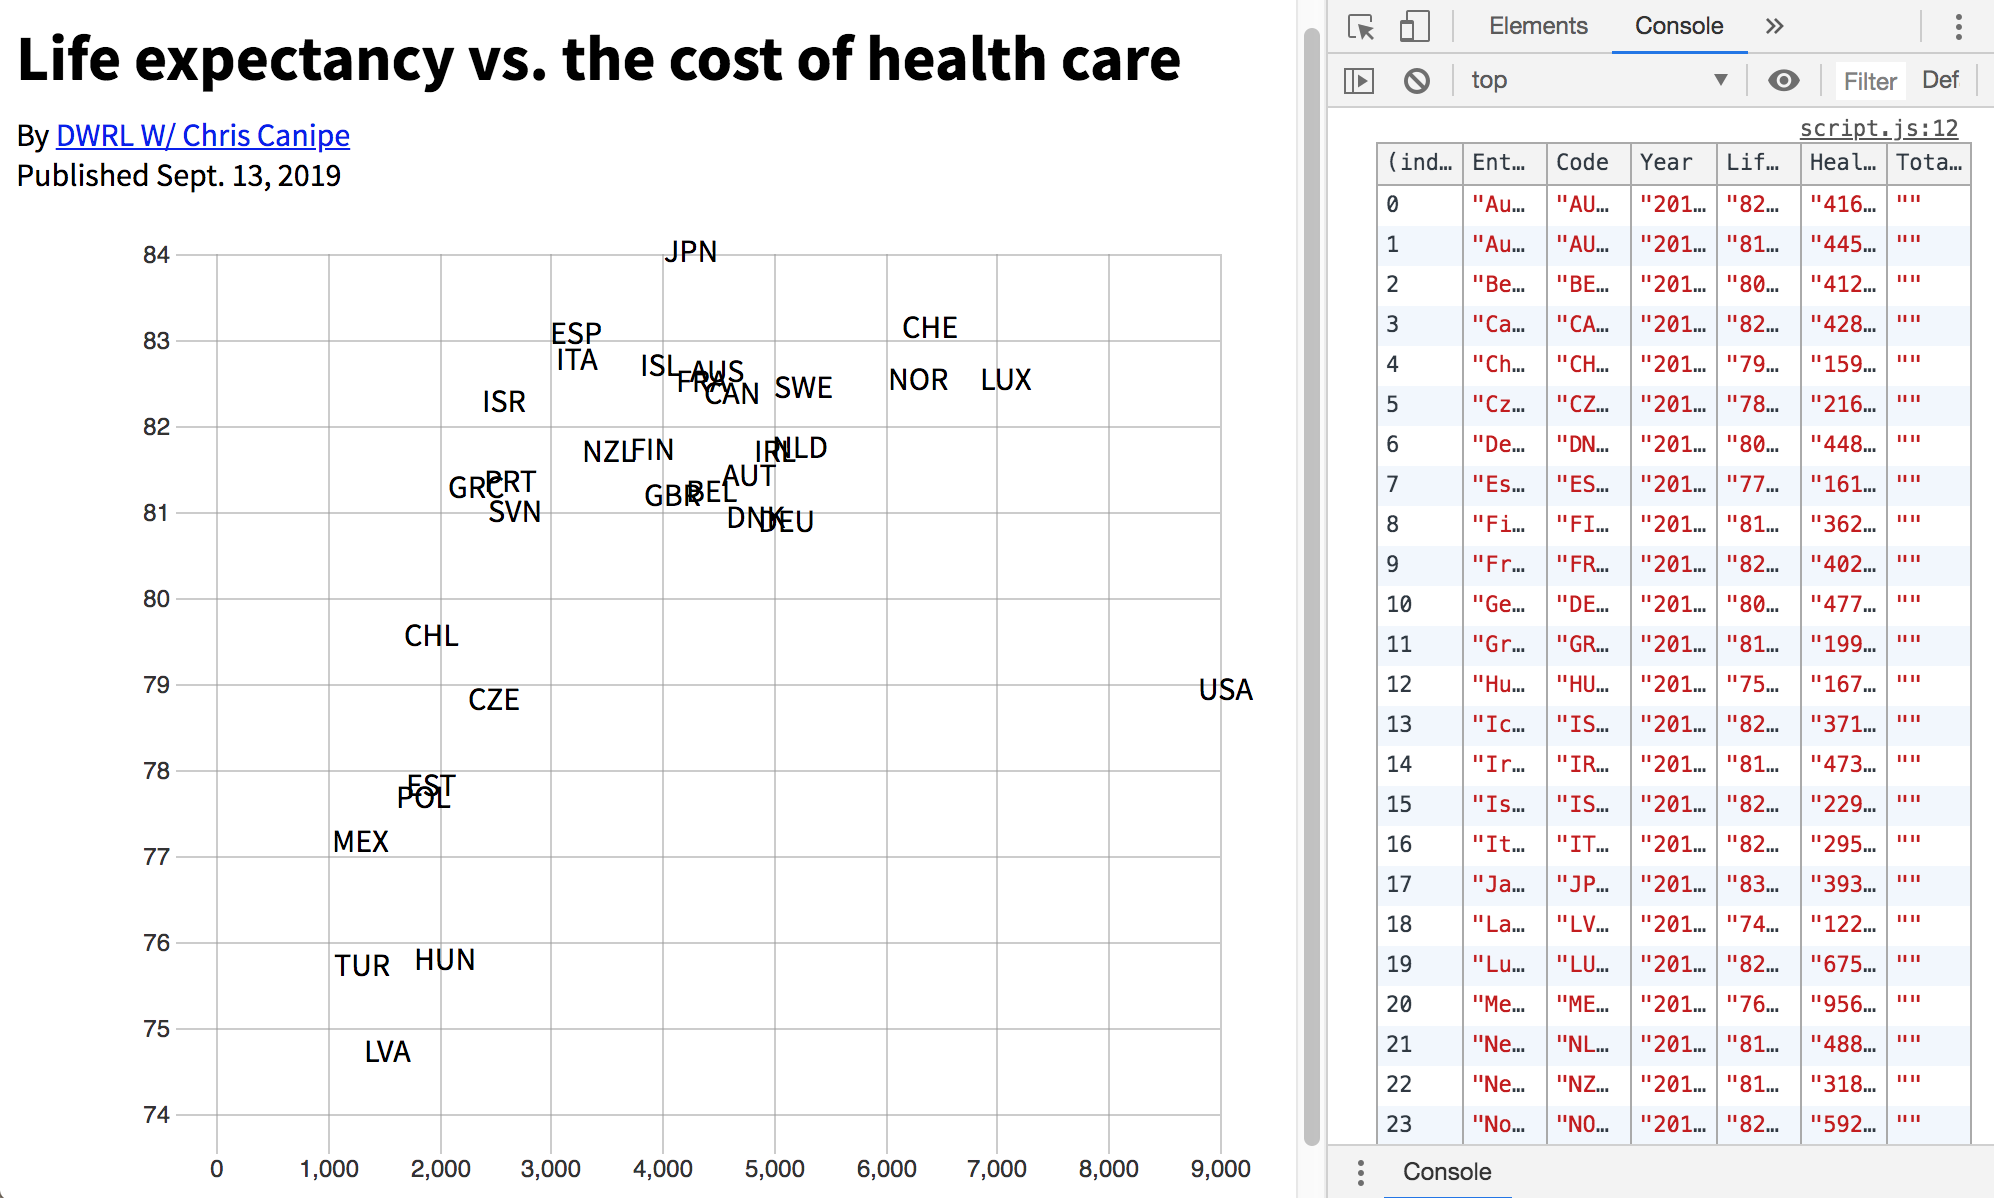 A scatterplot of life expectancy versus the cost of healthcare with country codes spread throughout